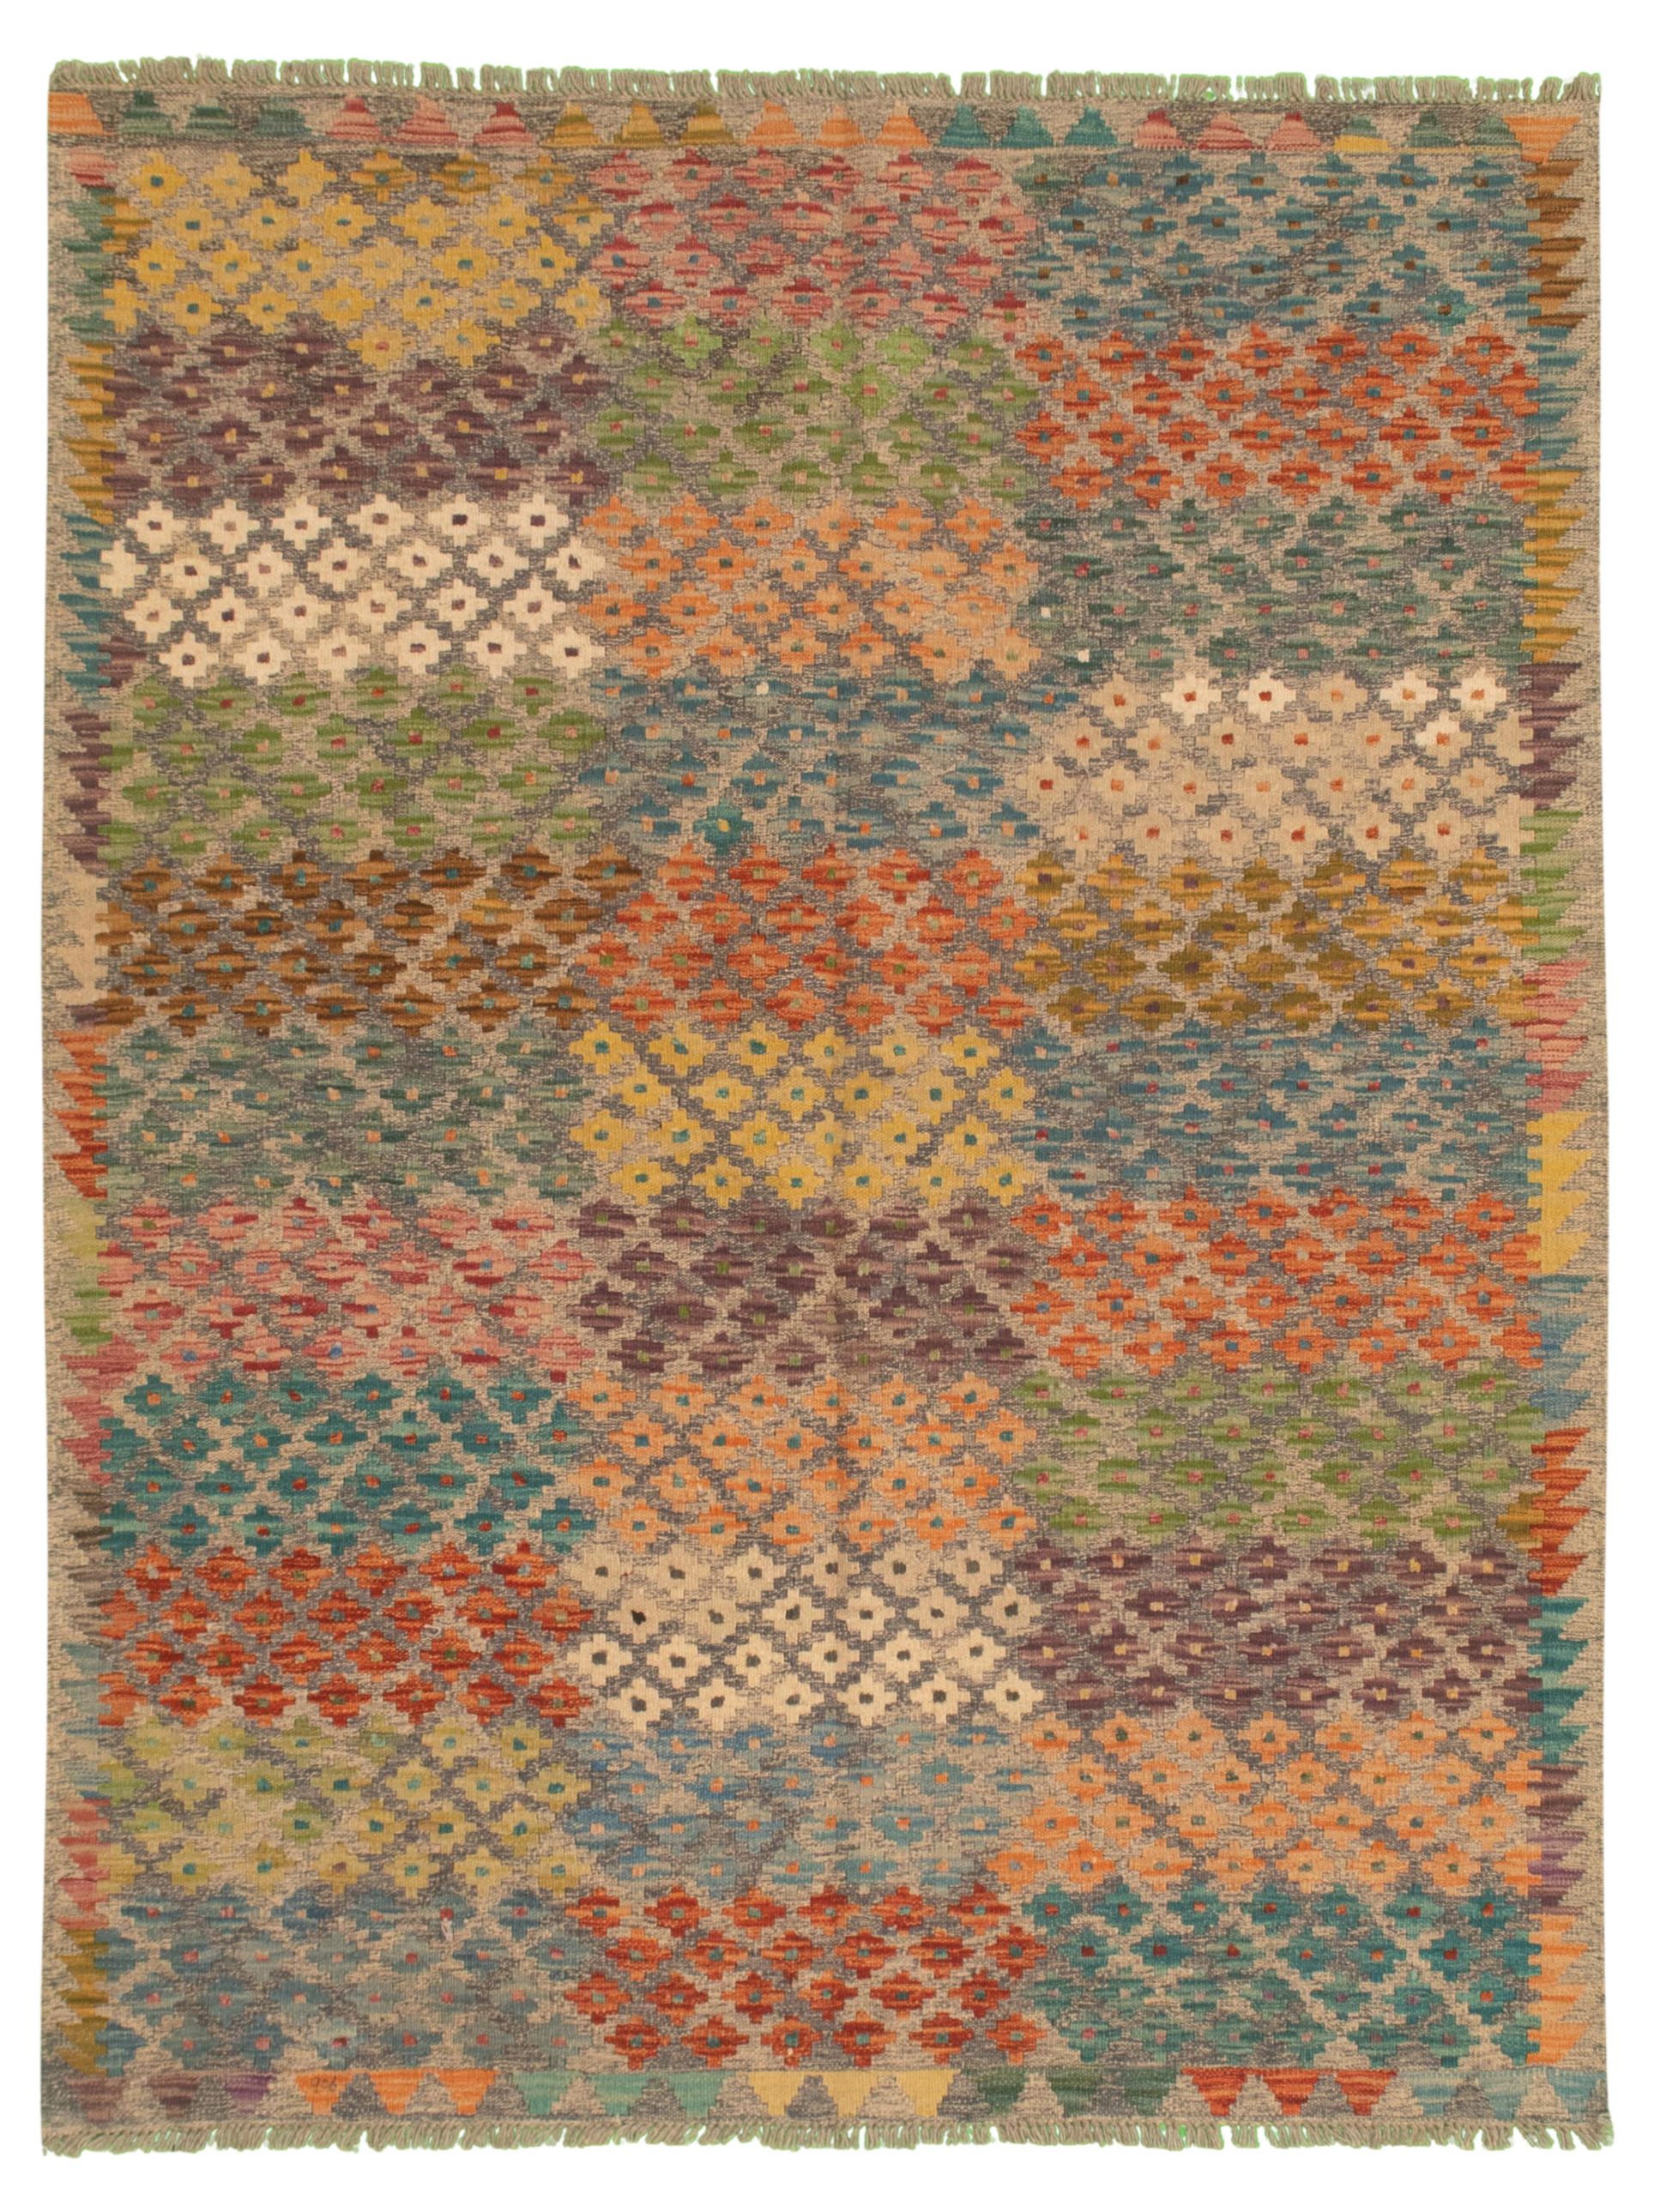 Hand woven Bold and Colorful  Grey Wool Kilim 4'10" x 6'6" Size: 4'10" x 6'6"  